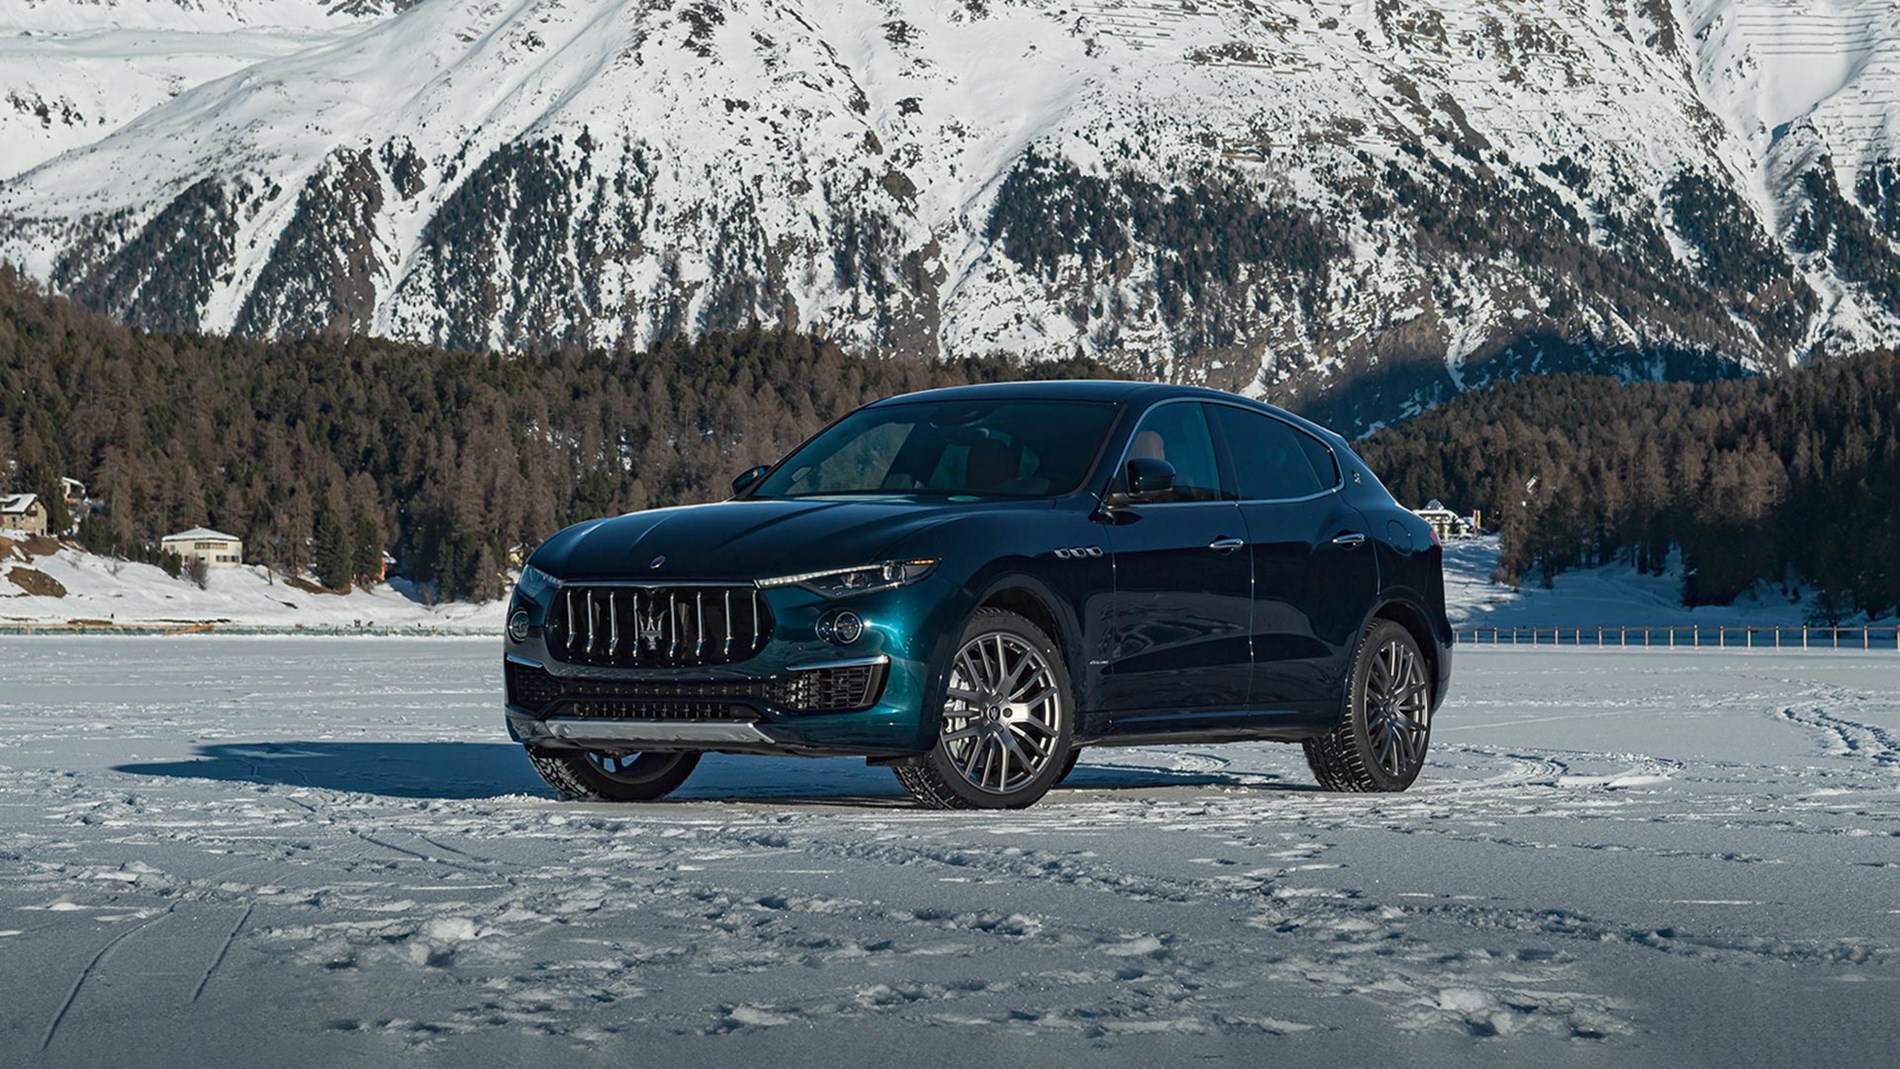 Maserati Premieres the new Levante Royale Special Series at the Snow Polo World Cup in St. Moritz